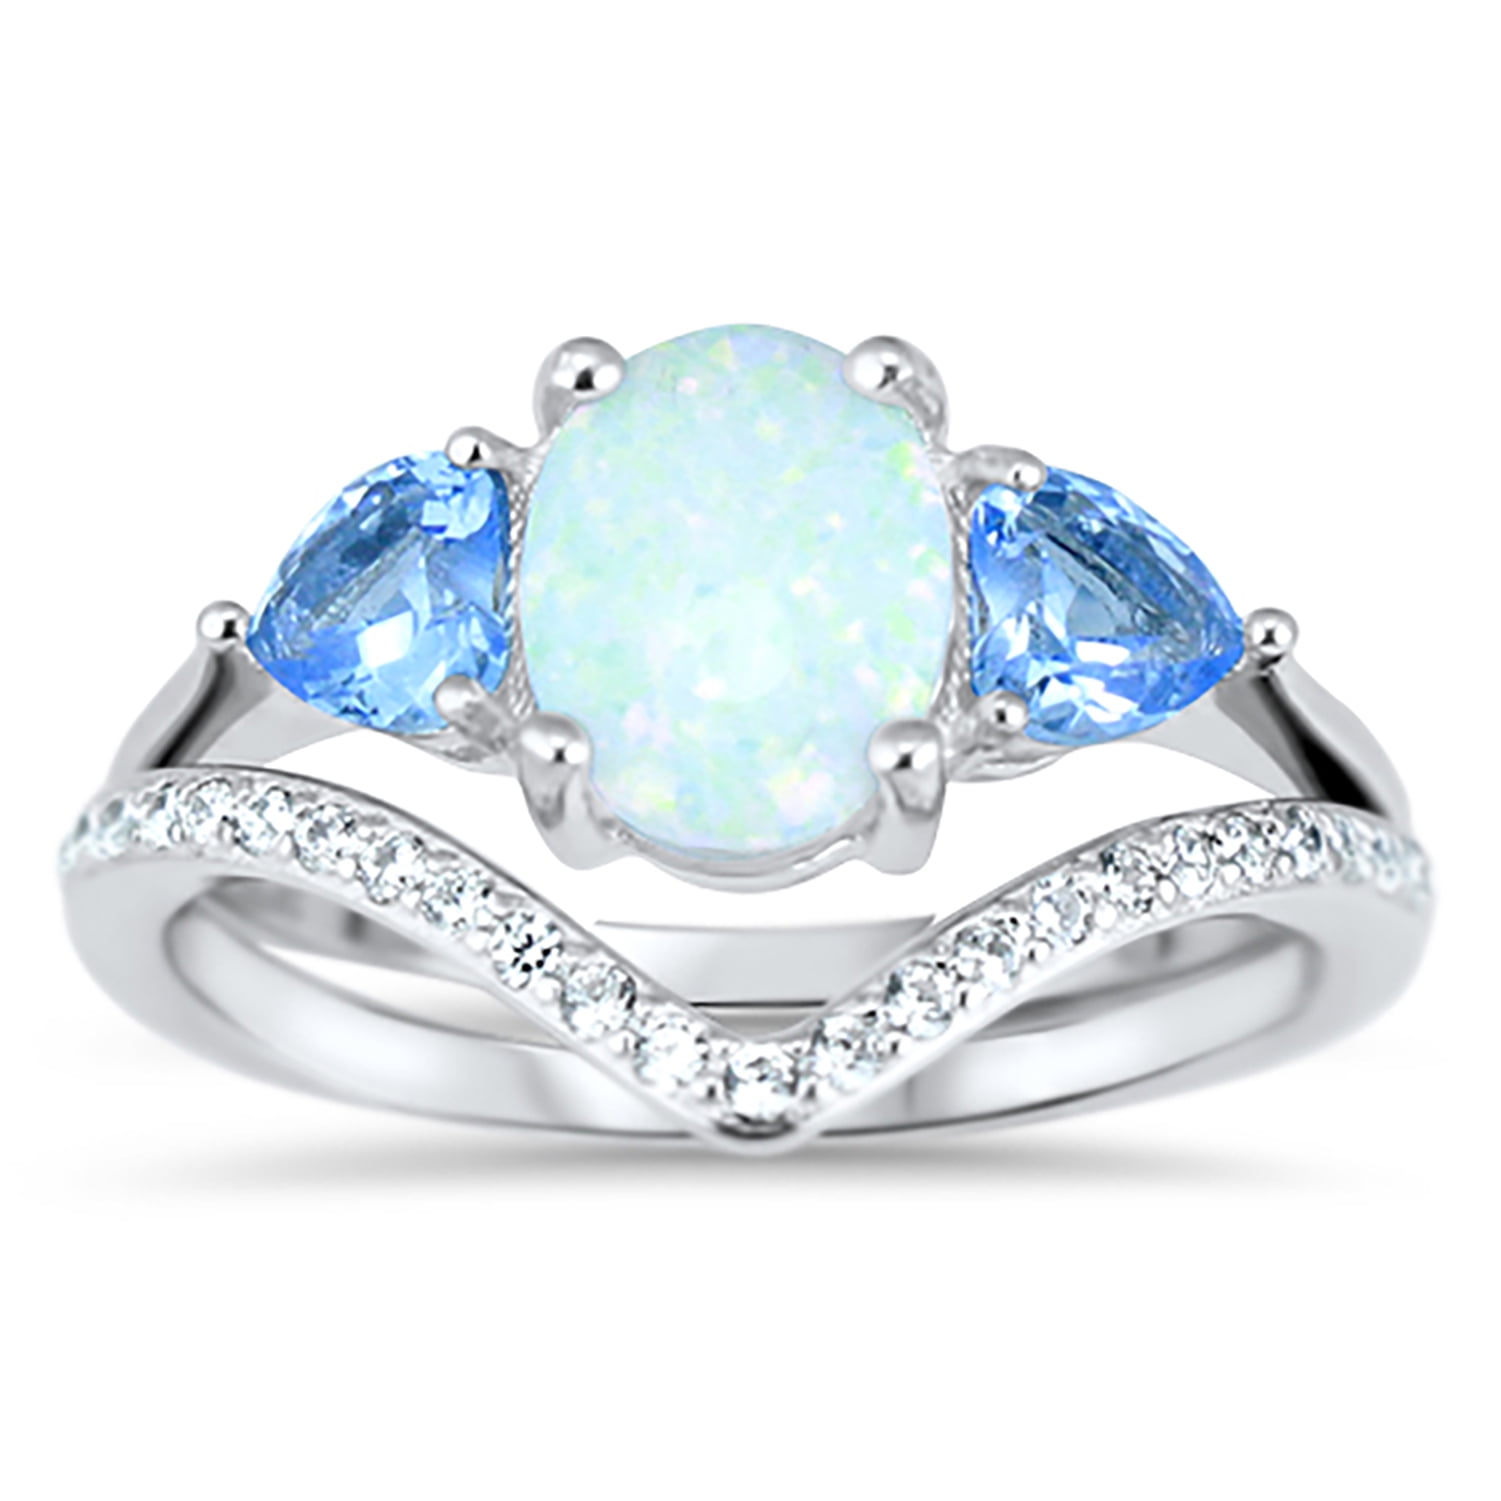 Round Cut White Fire Opal Halo CZ AAA Wedding Engagement Silver Ring Size 4-12 